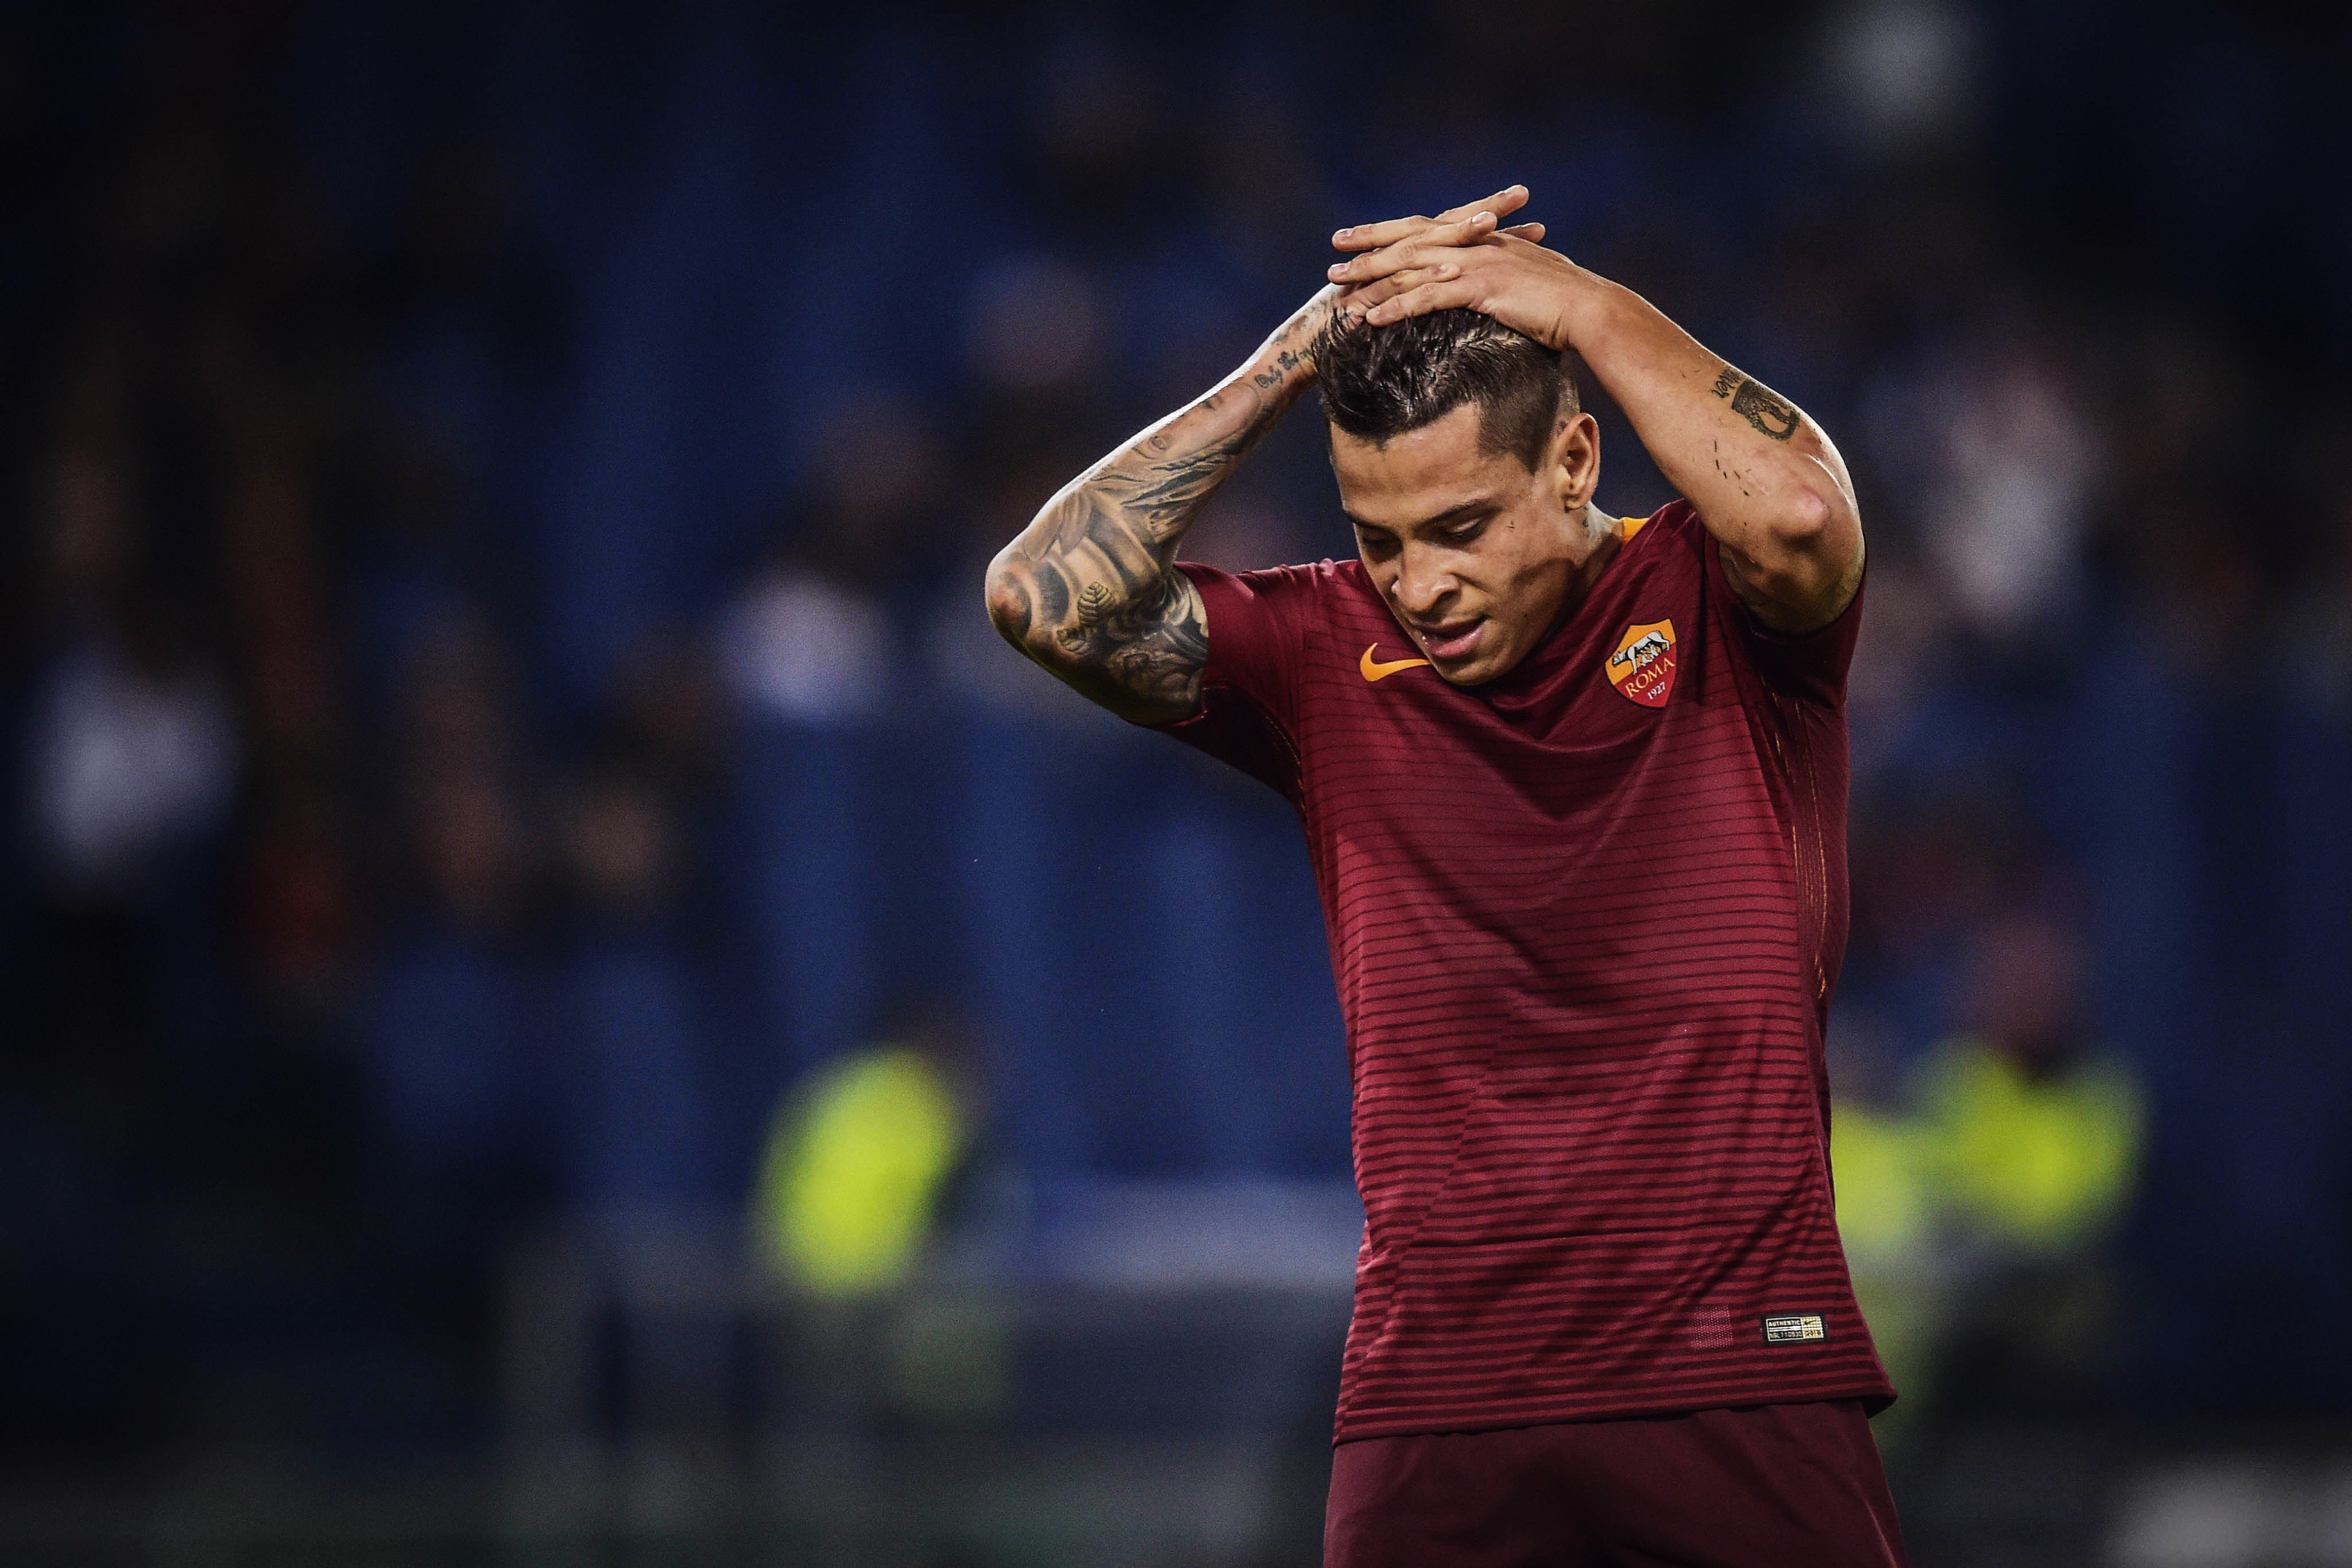 ROME, ITALY - SEPTEMBER 29: Juan Manuel Iturbe of AS Roma diasappointed during the UEFA Europa League match between AS Roma and FC Astra Giurgiu at Olimpico Stadium on September 29, 2016 in Rome, . (Photo by Luciano Rossi/AS Roma via Getty Images)